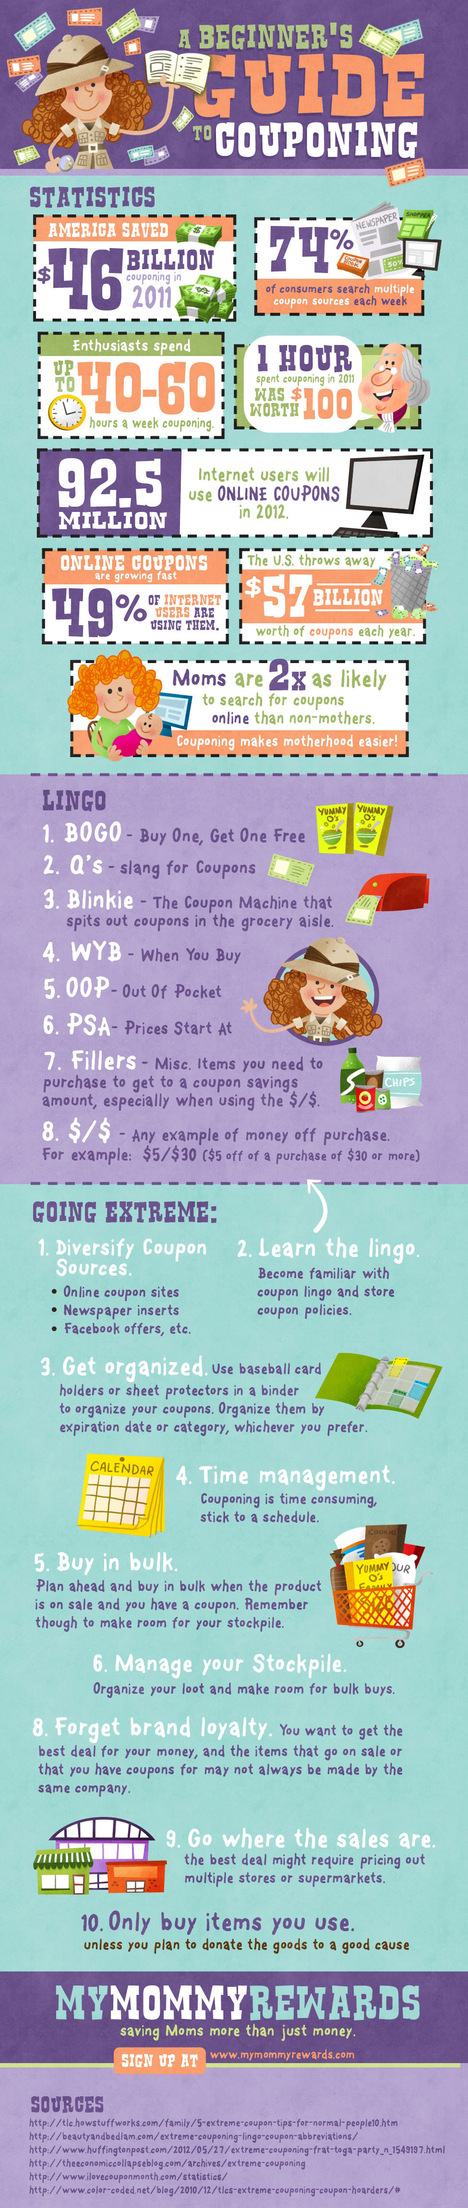 Couponing Infographic